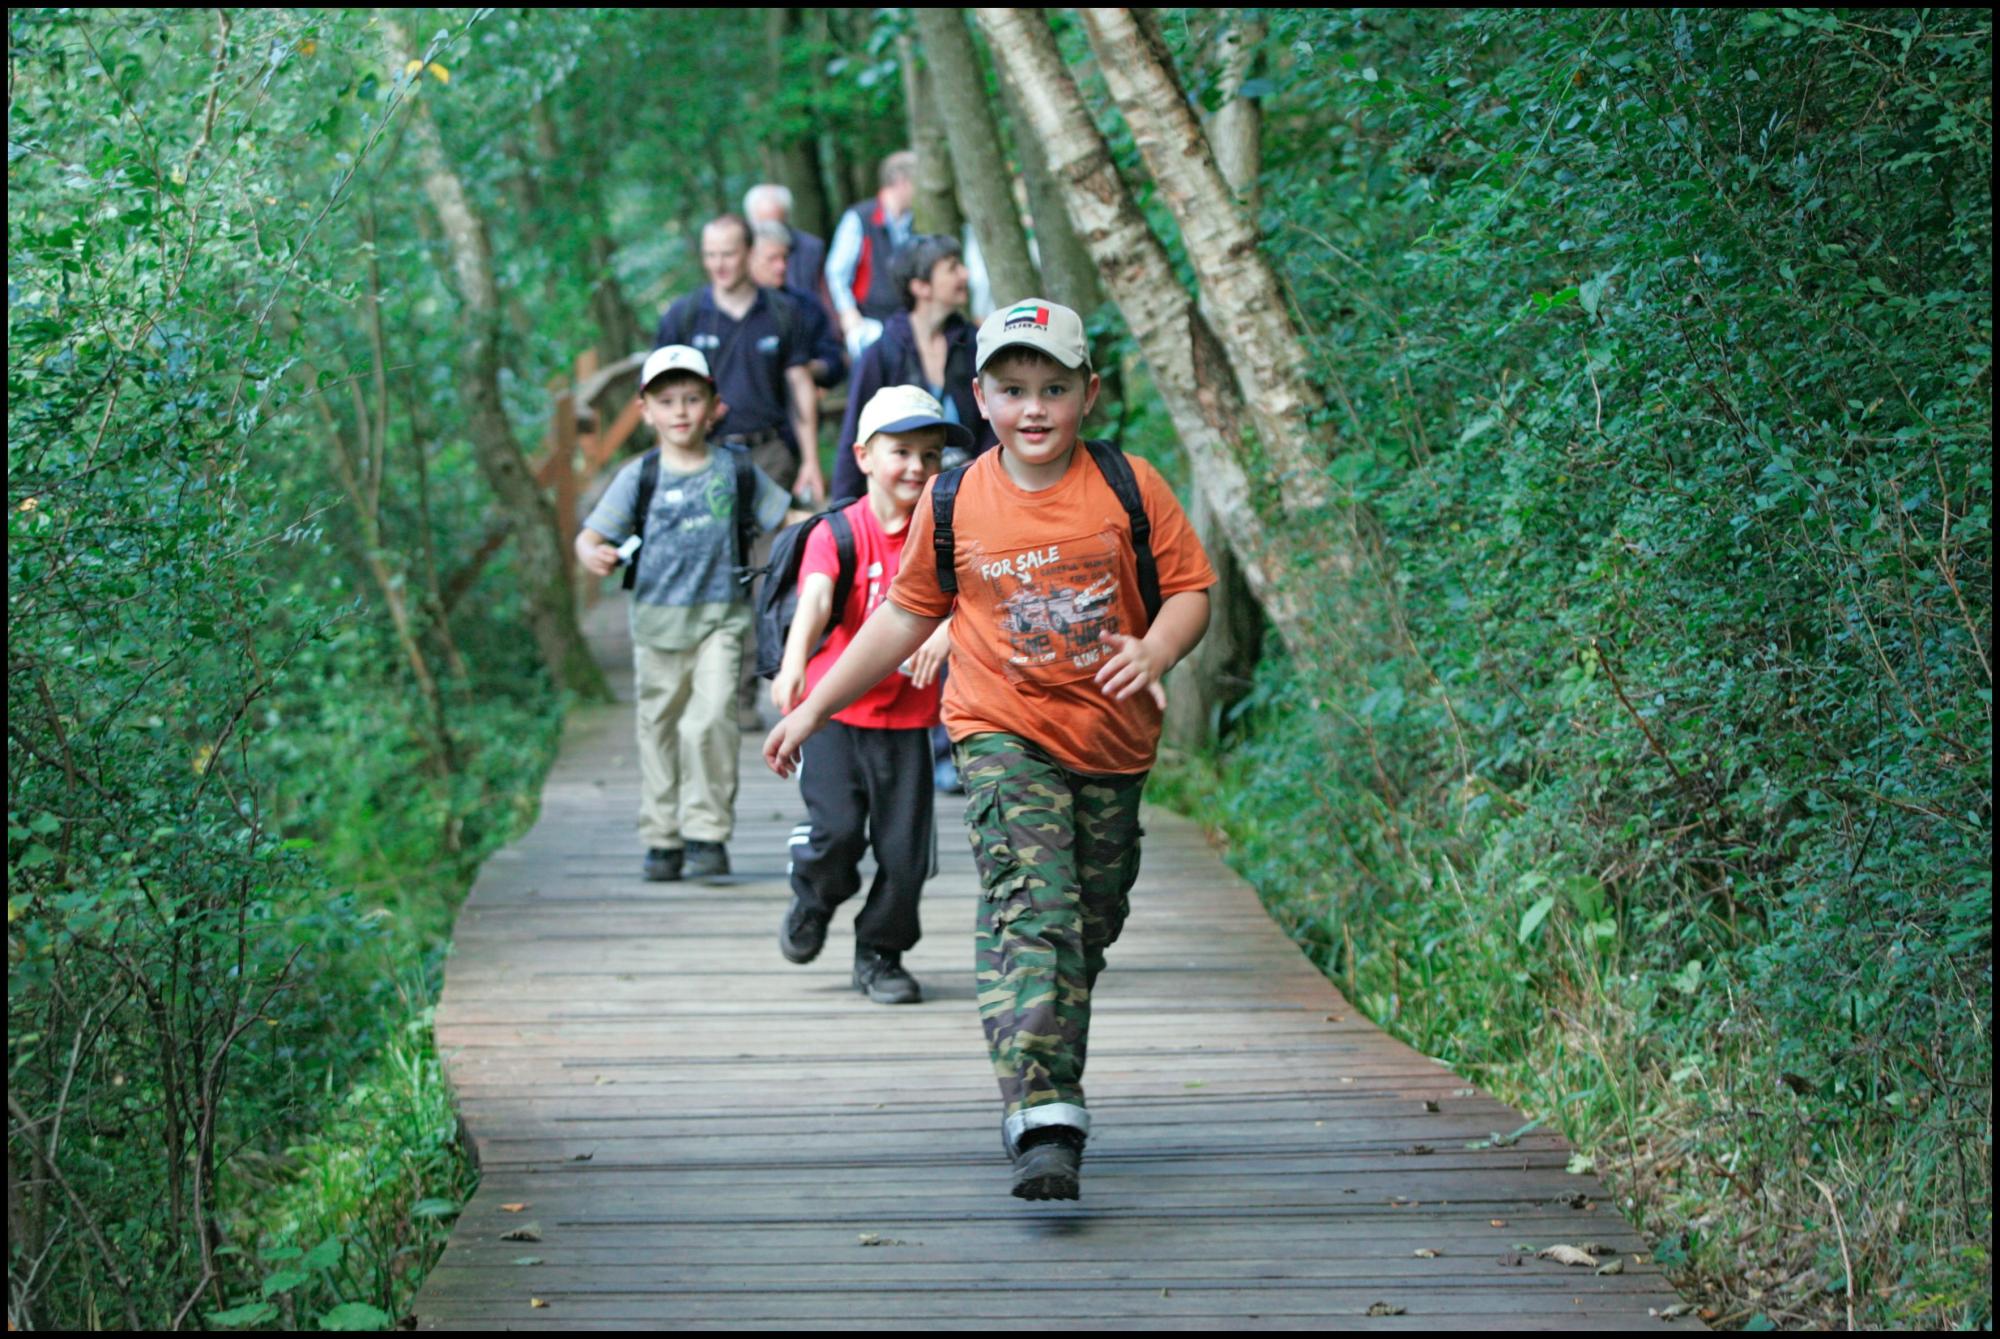 Children running over wooden walkway in forest. ©Lorne Gill/SNH. For information on reproduction rights contact the Scottish Natural Heritage Image Library on Tel. 01738 444177 or www.nature.scot